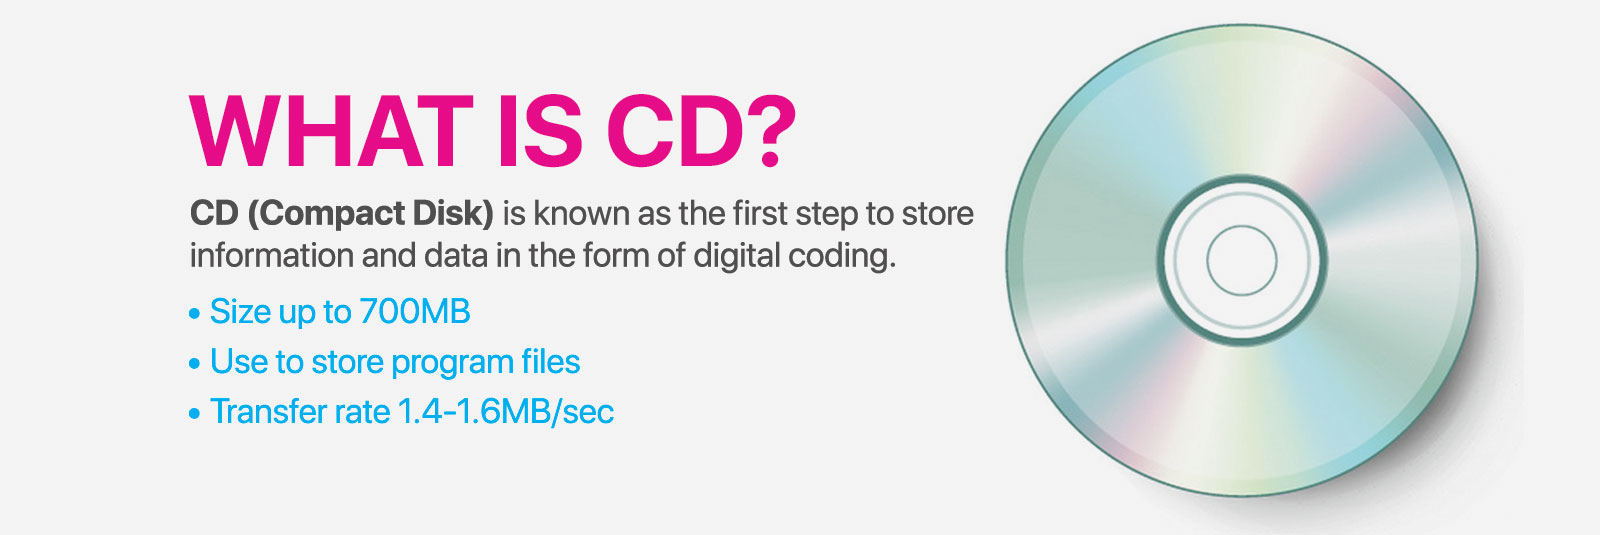 What is CD? CD (Compact Disk) is known as the first step to store information and data in the form of digital coding